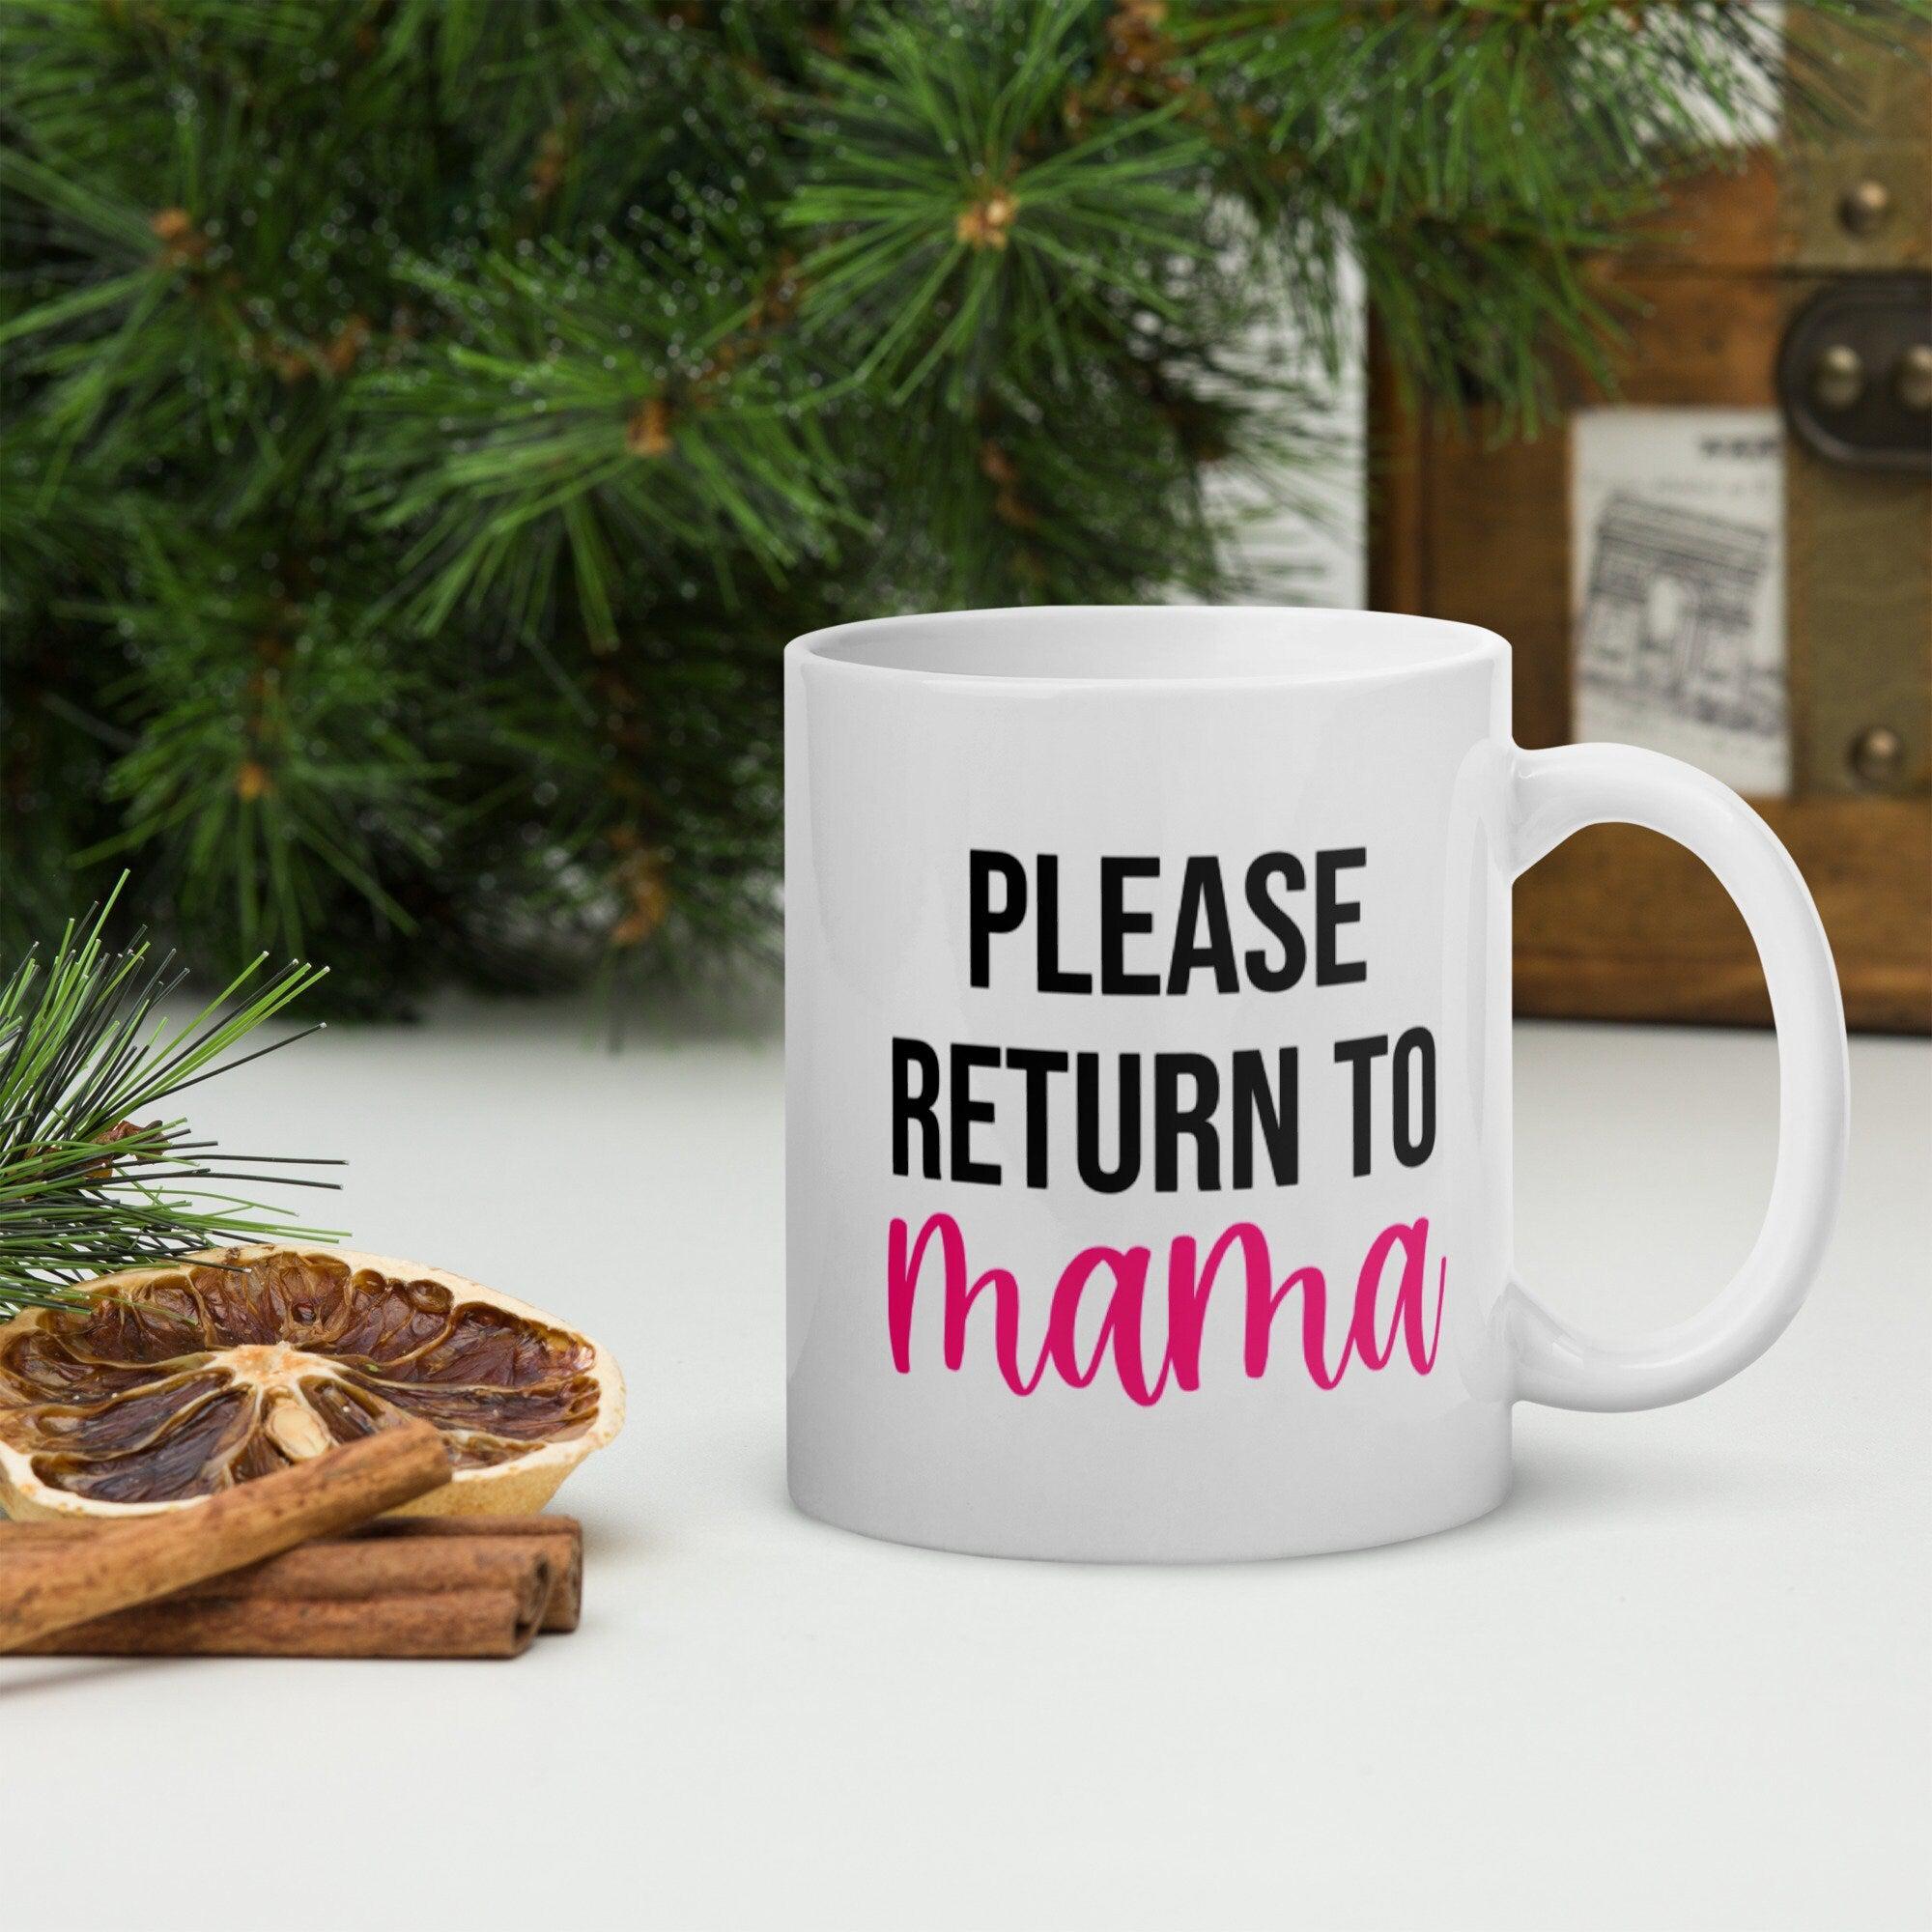 If Found in the Microwave, Please Return to Mama Coffee Mug Salt and Sparkle